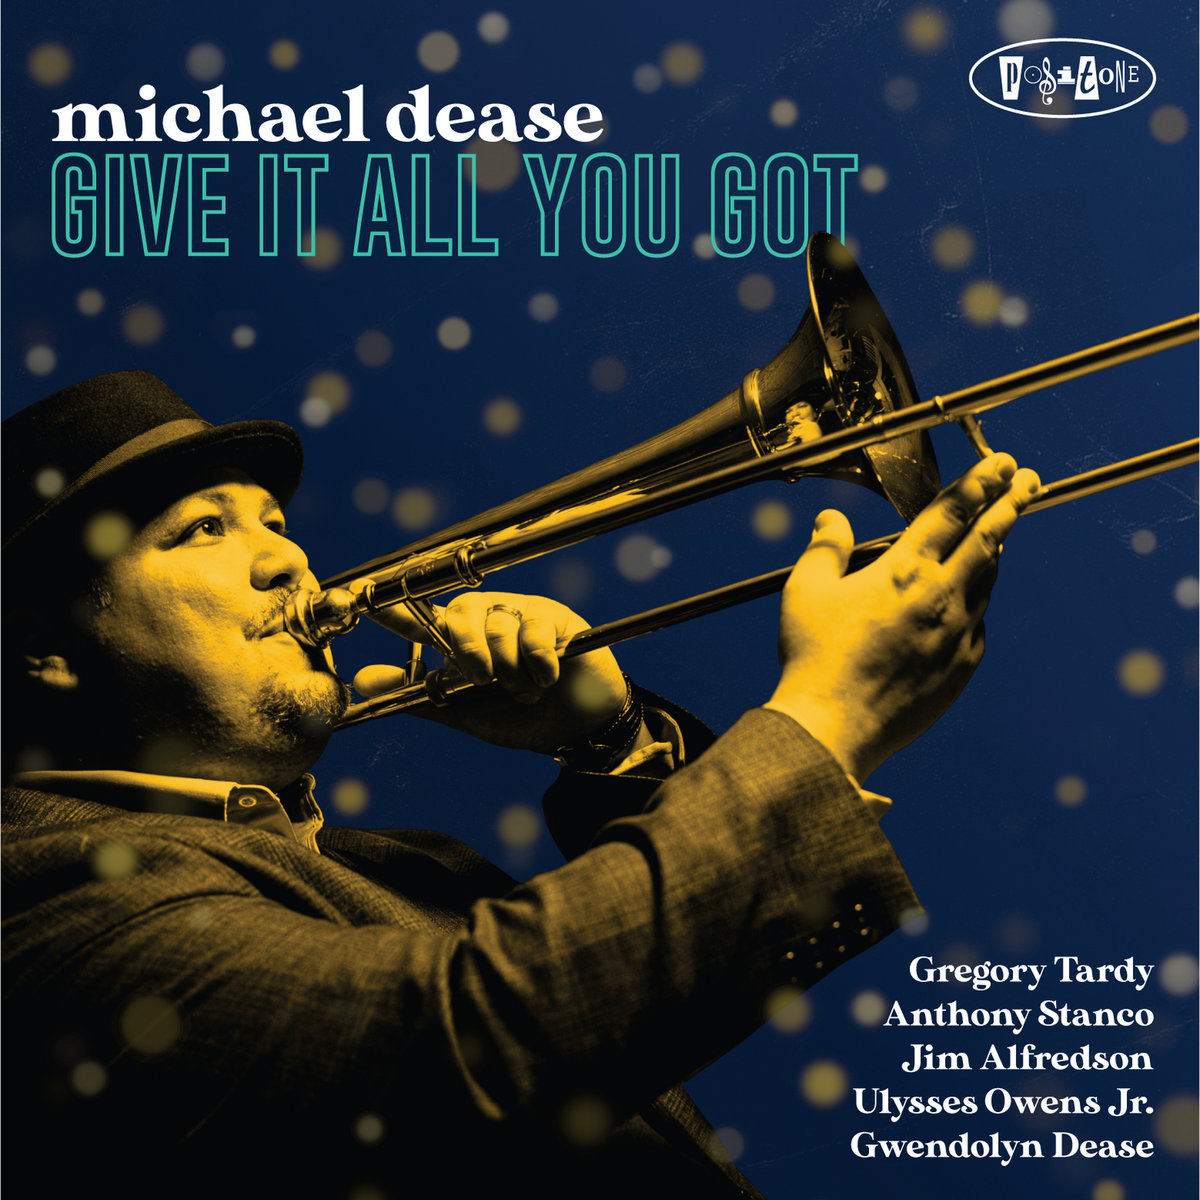 Give it all you got! Michael Dease album cover